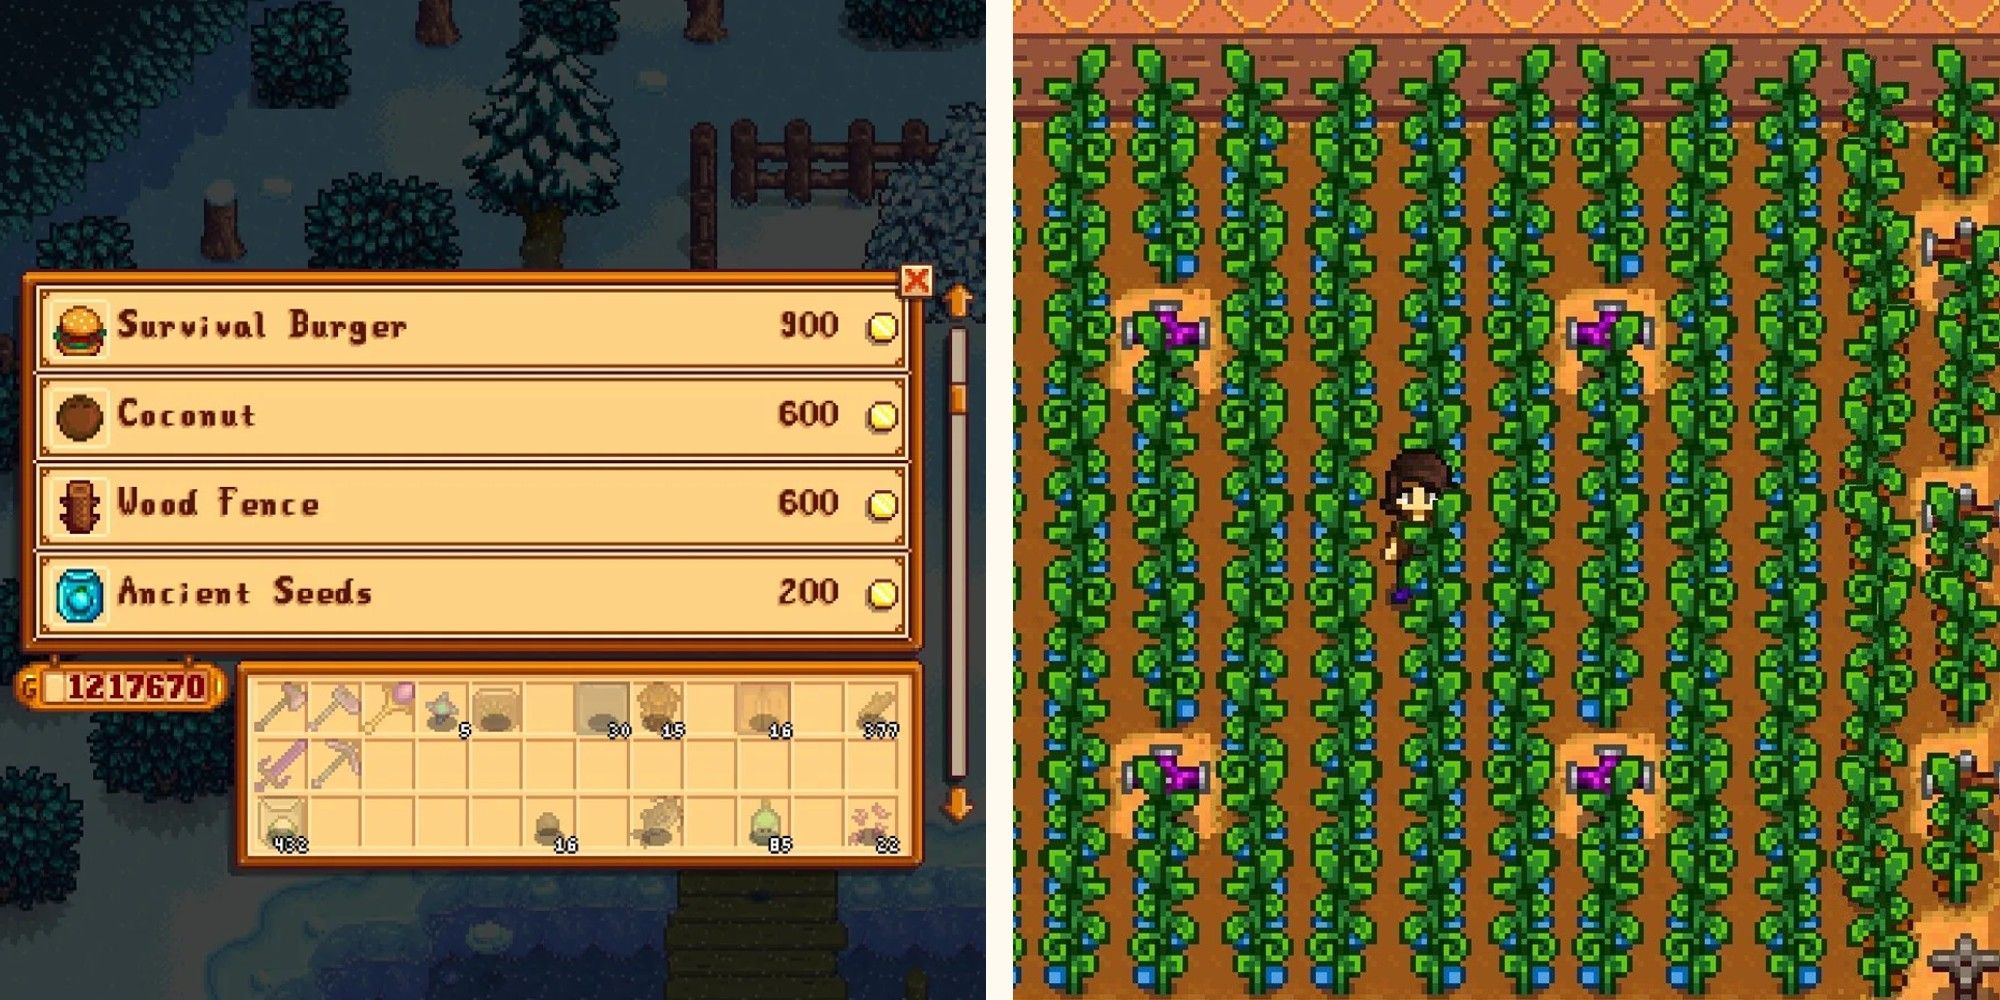 image of traveling merchant shop inventory next to image of growing ancient fruit plants